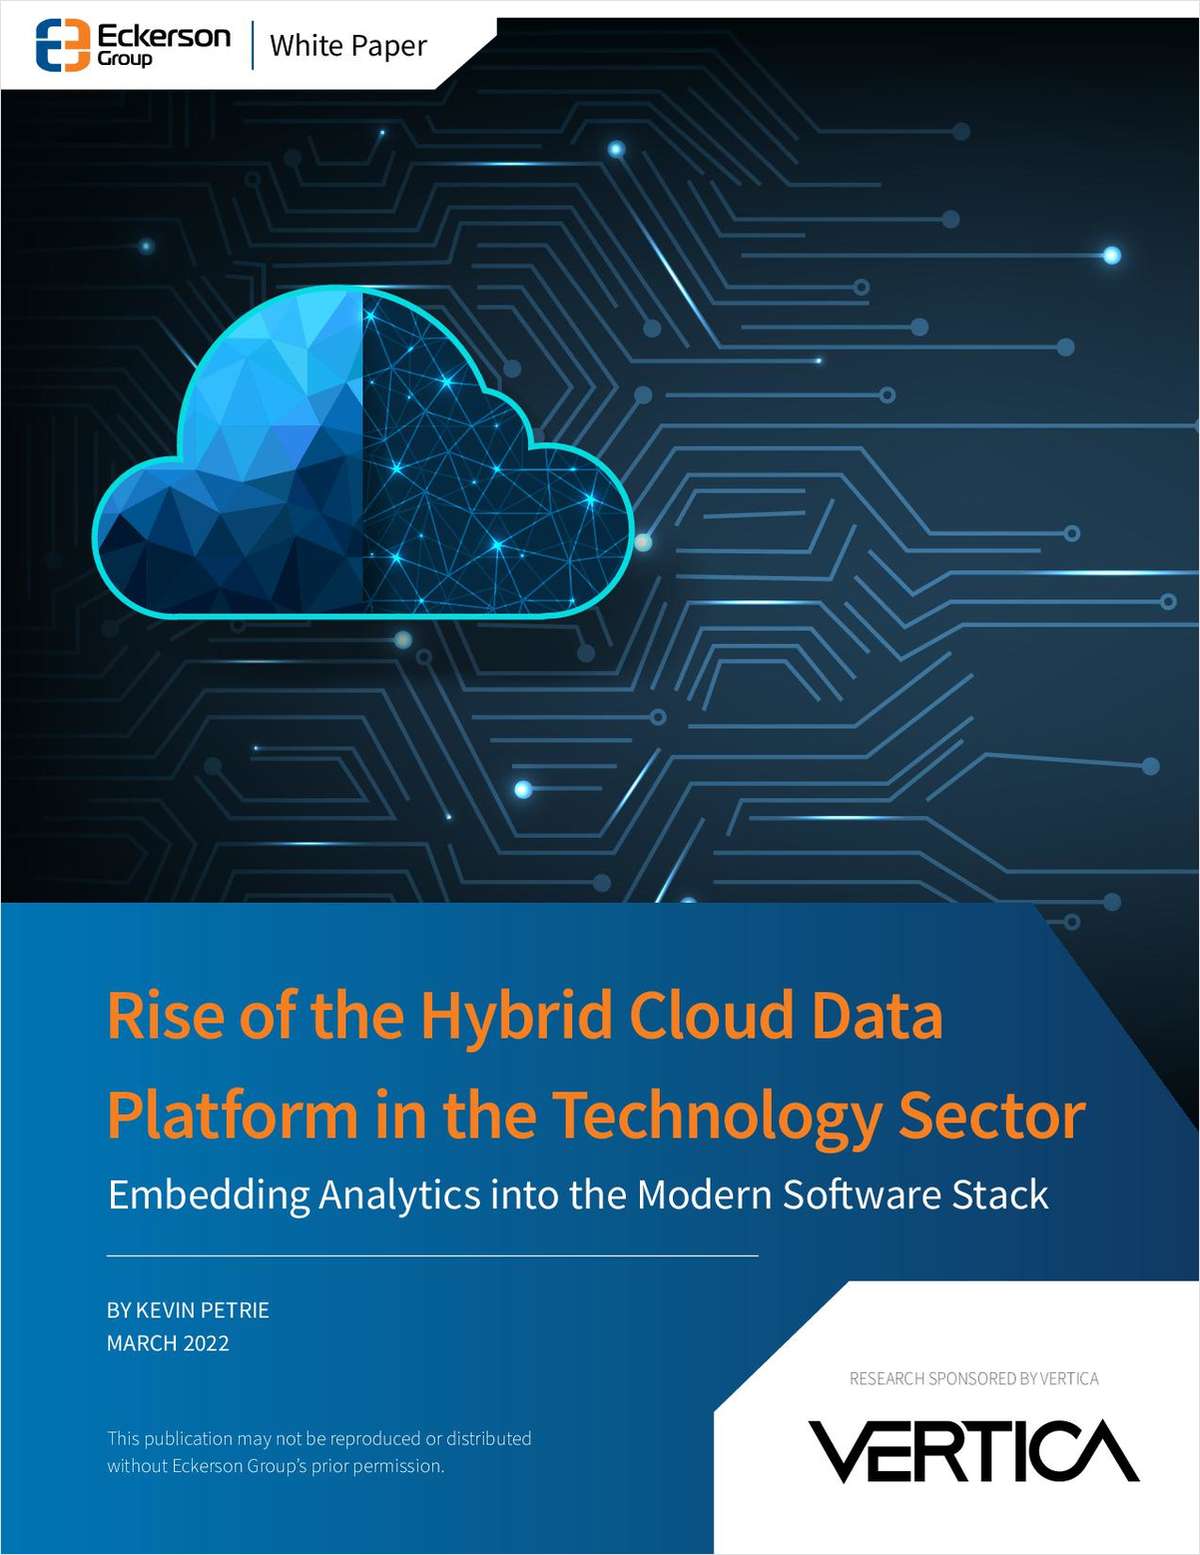 Rise of the Hybrid Cloud Data Platform in the Technology Sector